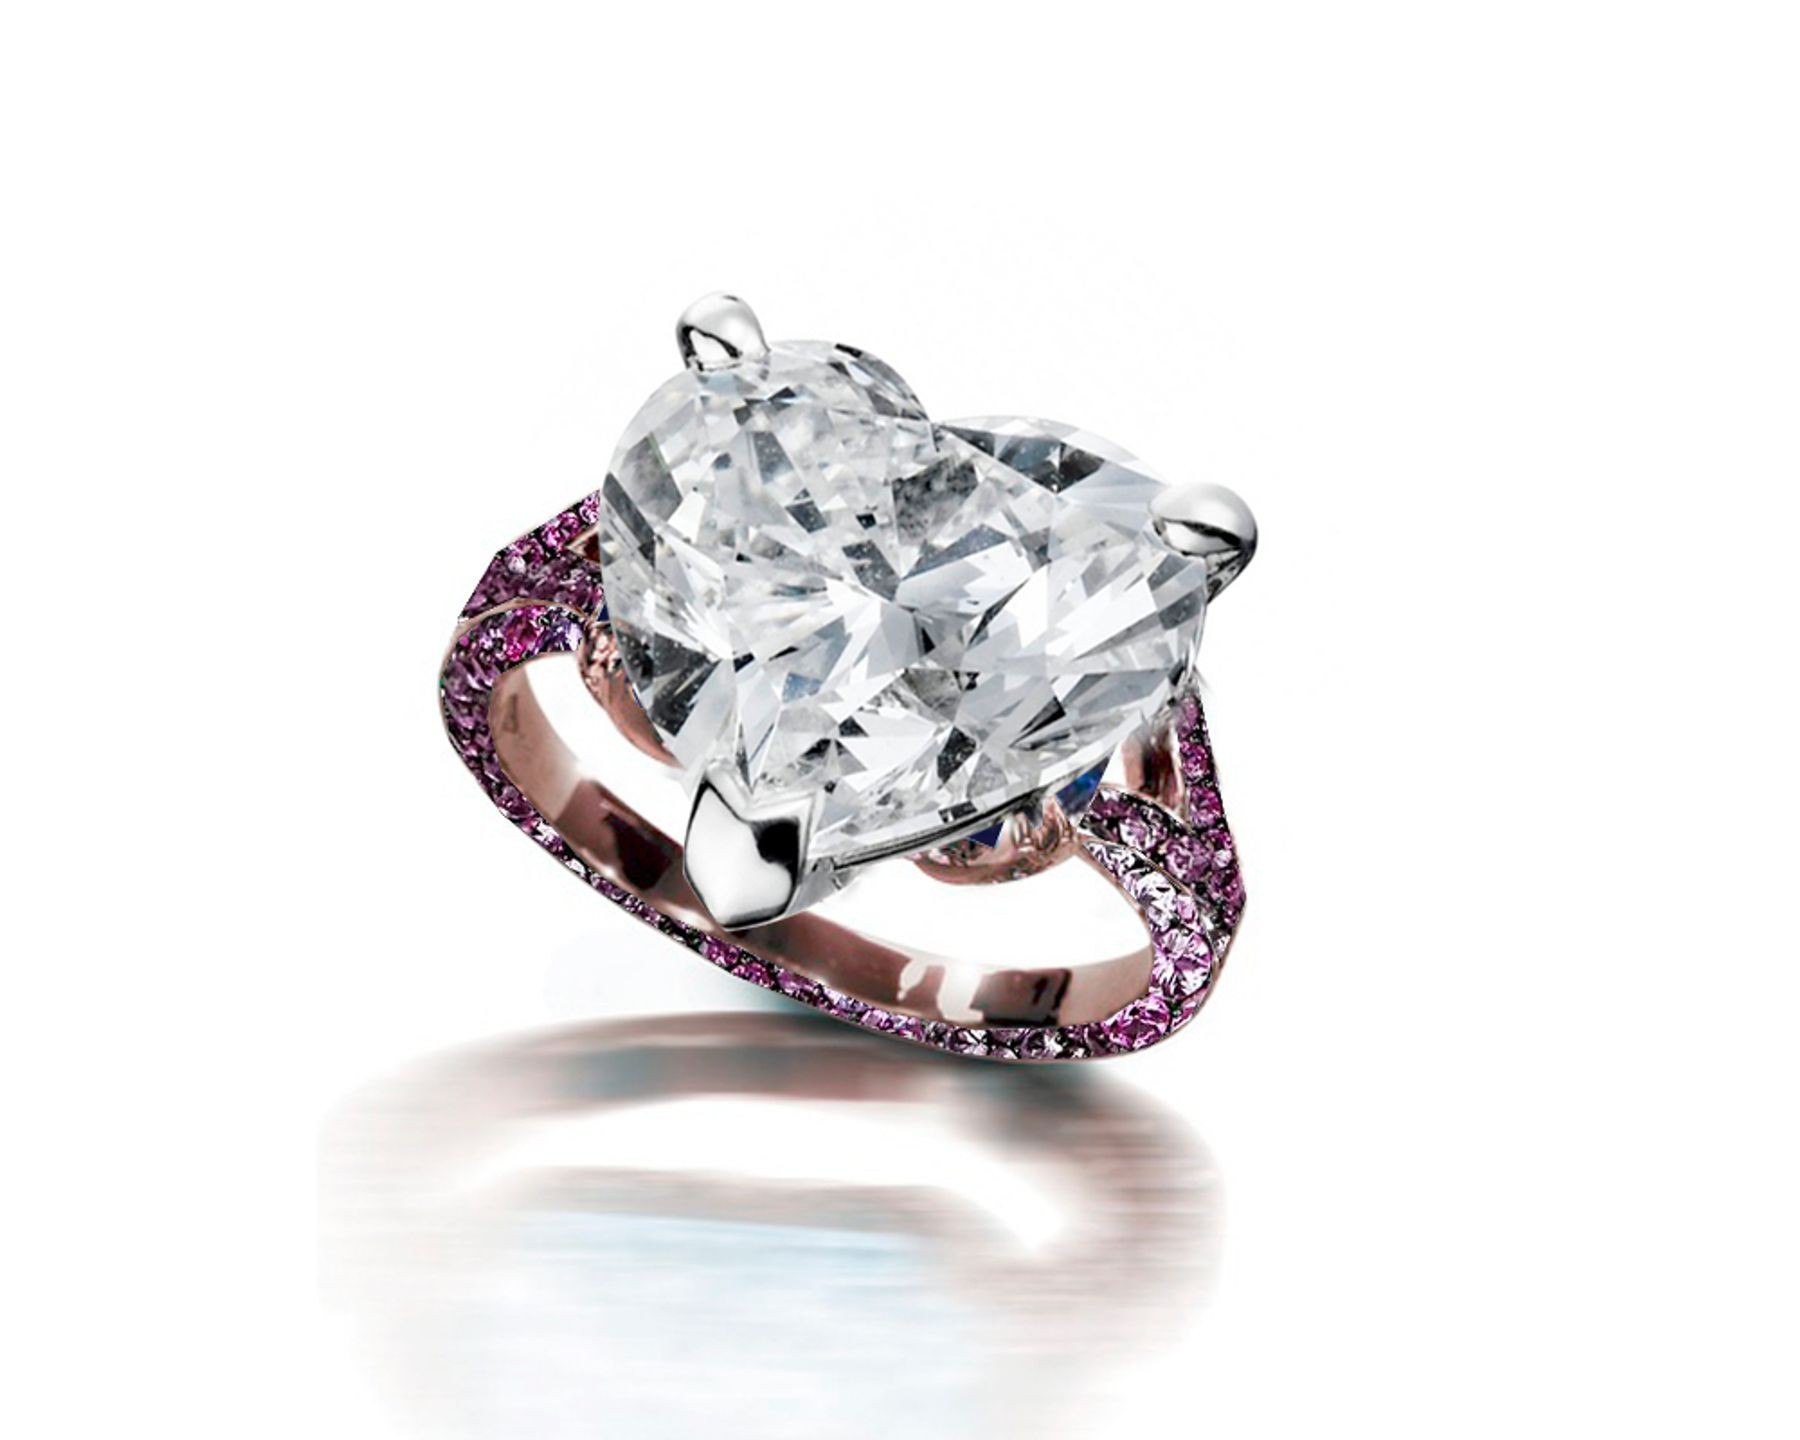 Ring with Heart Diamond & Pave Set Purple Sapphires in Gold or Platinum